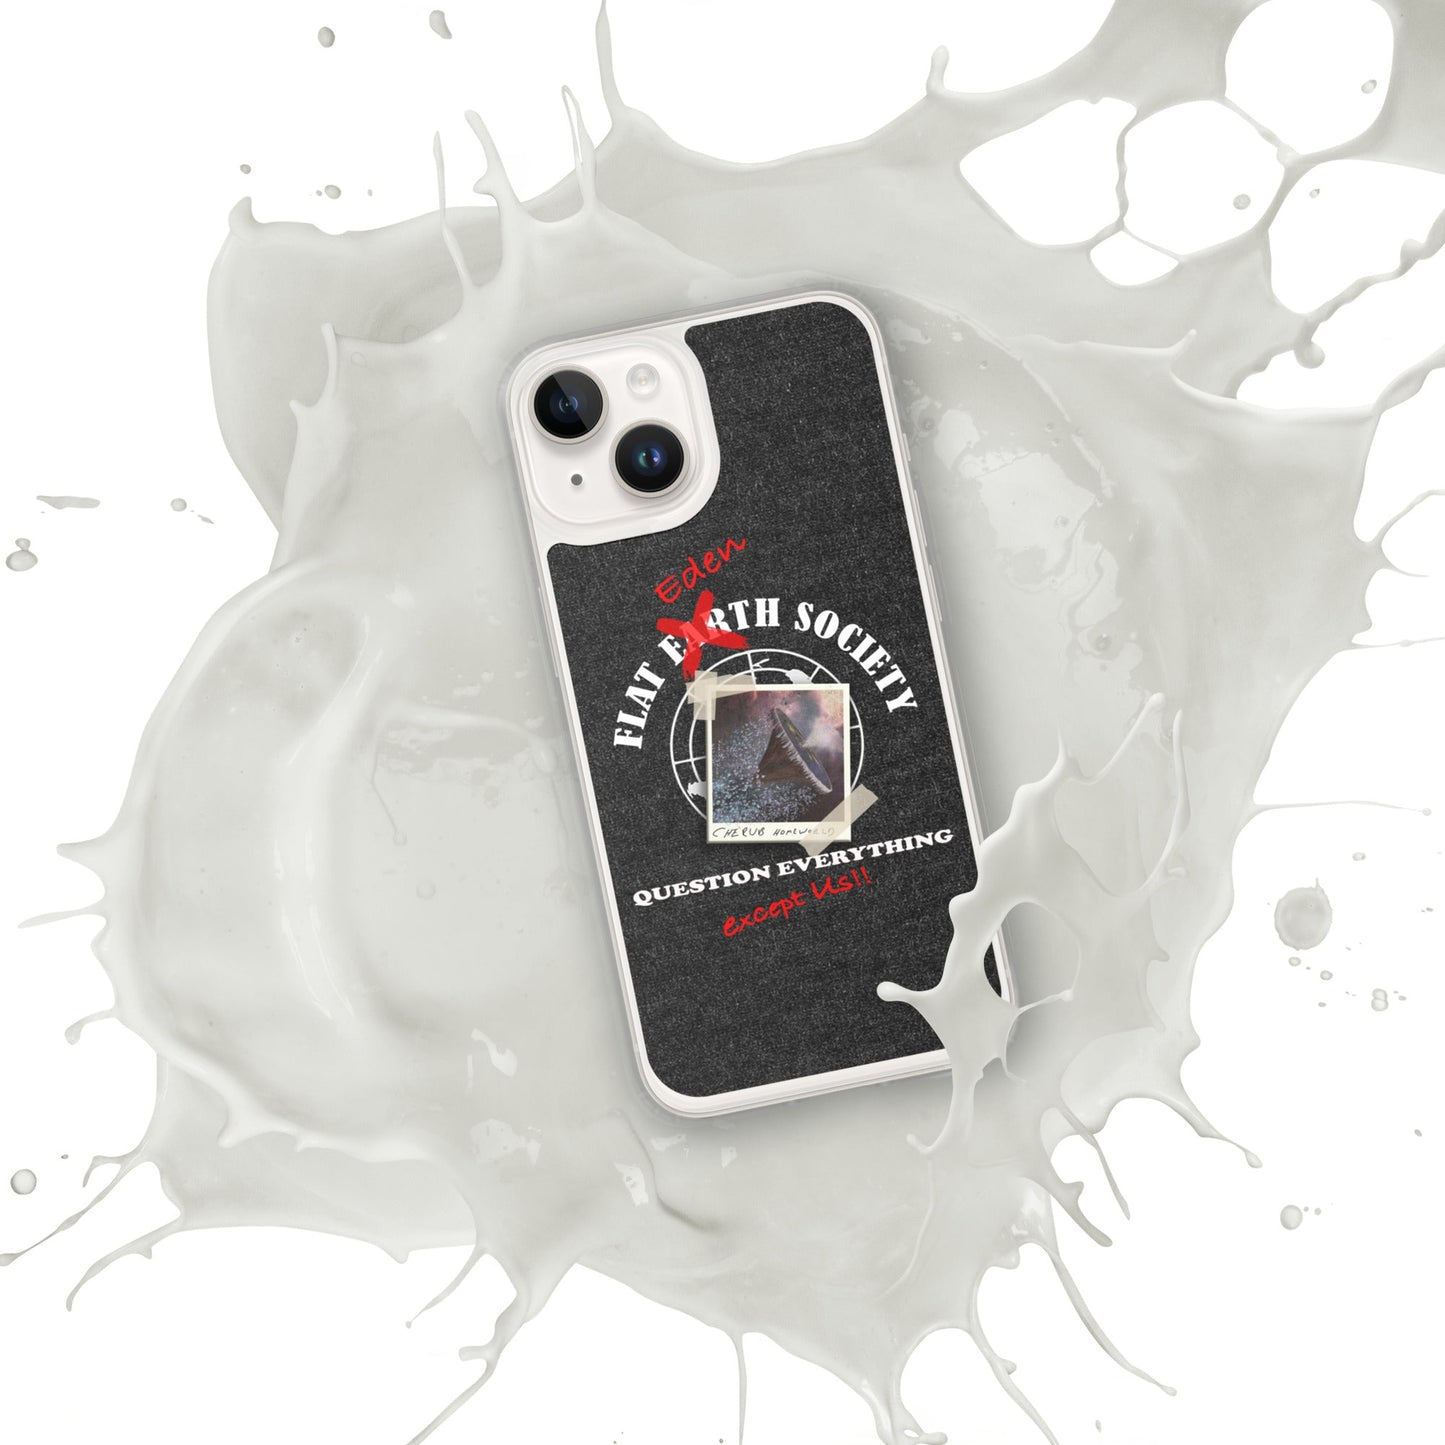 iPhone Case | Intergalactic Space Force 2 | Flat Eden Society - Spectral Ink Shop - Mobile Phone Cases -9780728_16240